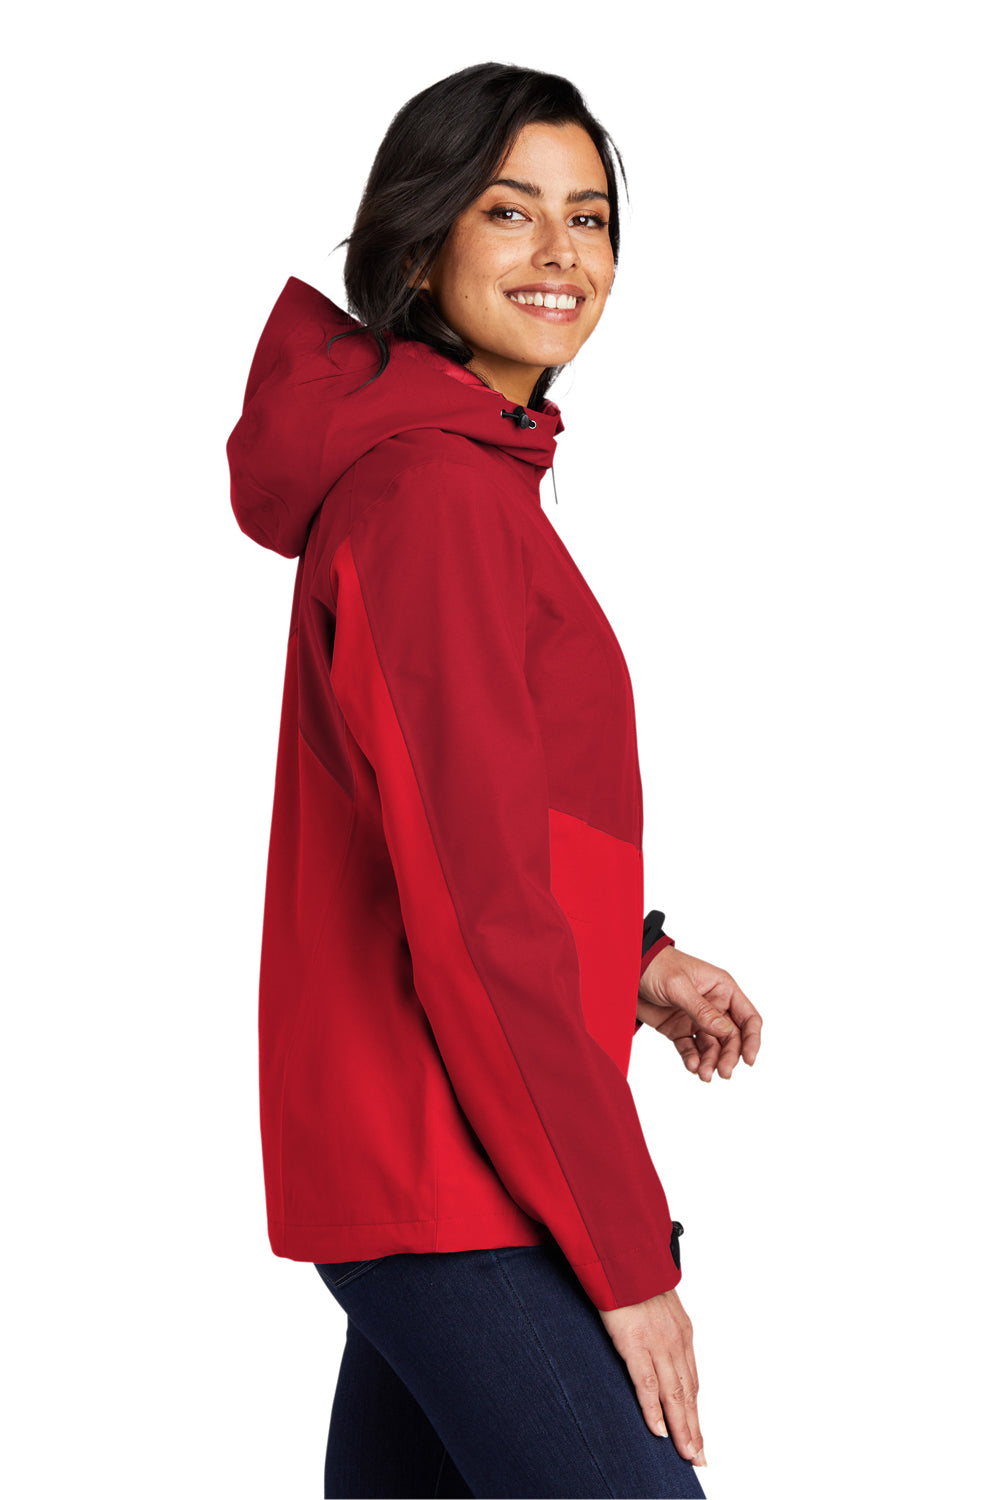 Port Authority Womens Tech Full Zip Hooded Rain Jacket Sangria Red/True Red Side